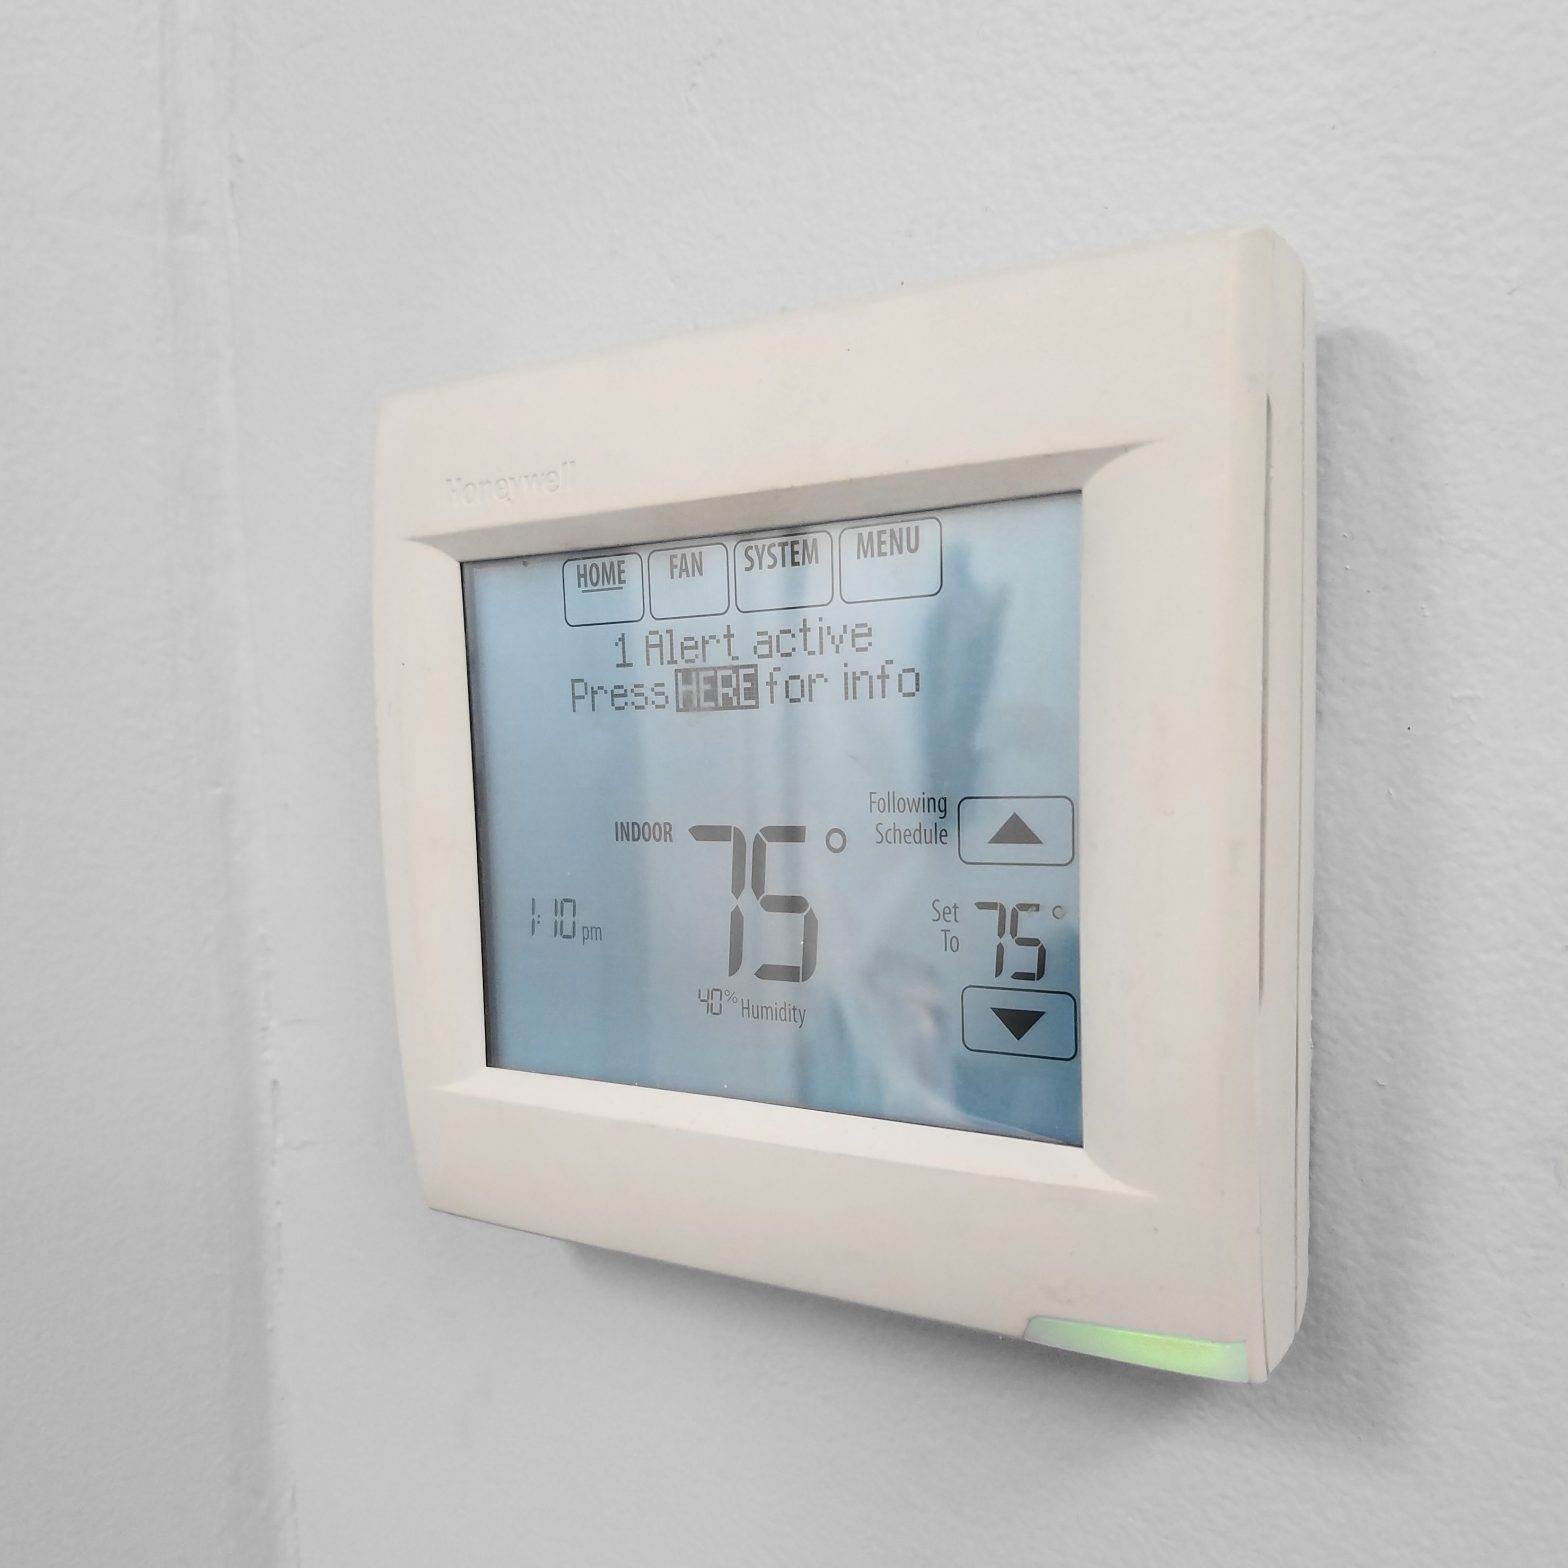 lutron total home control system